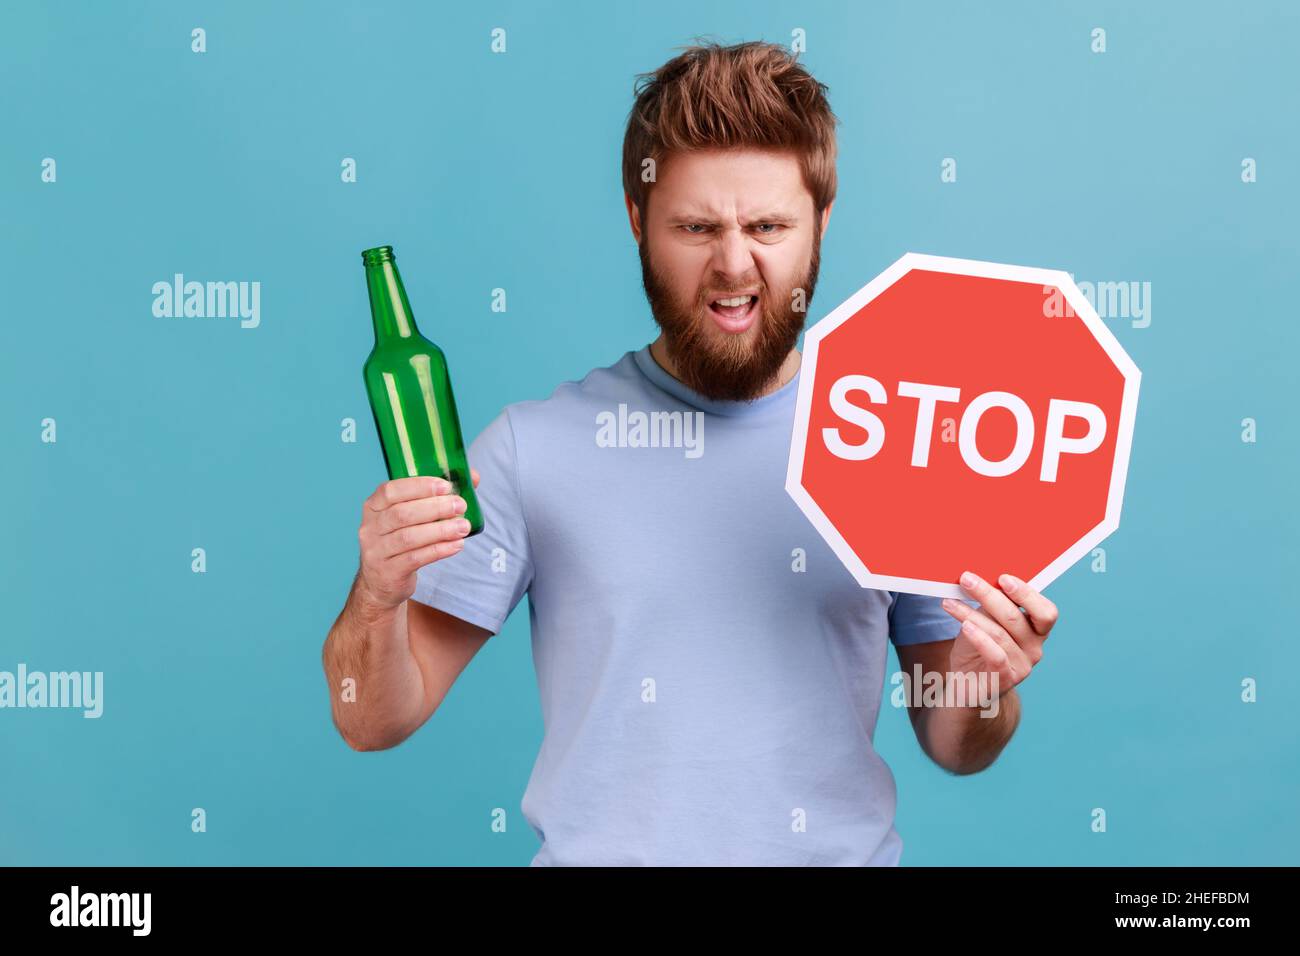 Portrait of bearded man showing alcoholic beverage beer bottle and stop sign, warning and worrying, looking at camera with angry expression. Indoor studio shot isolated on blue background. Stock Photo